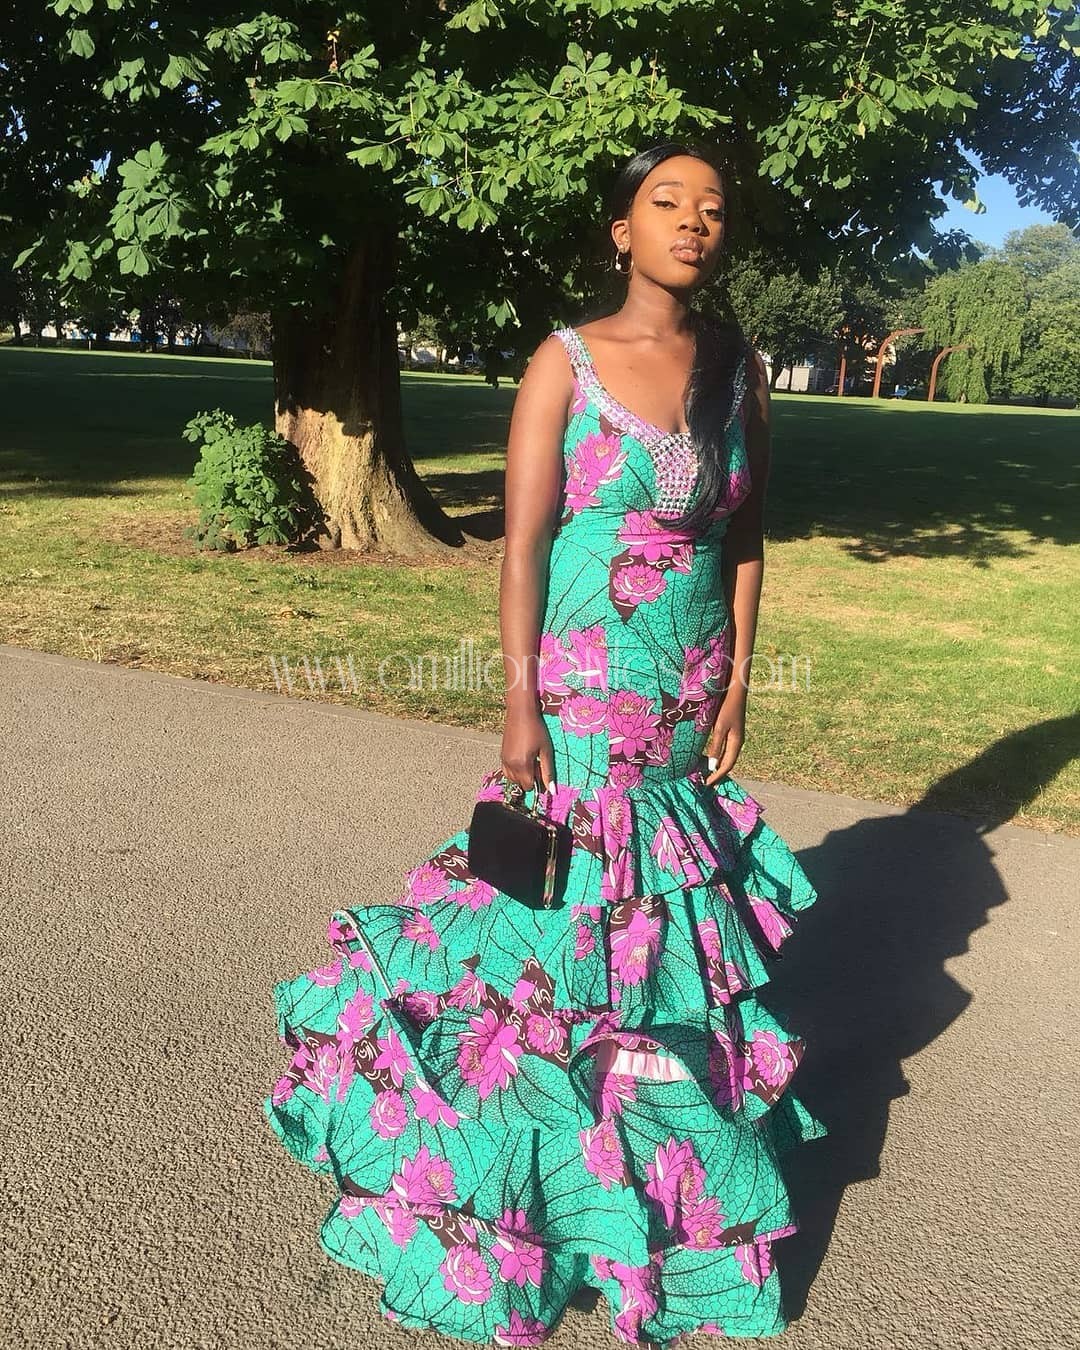 Top Ankara Styles That Beat All Others